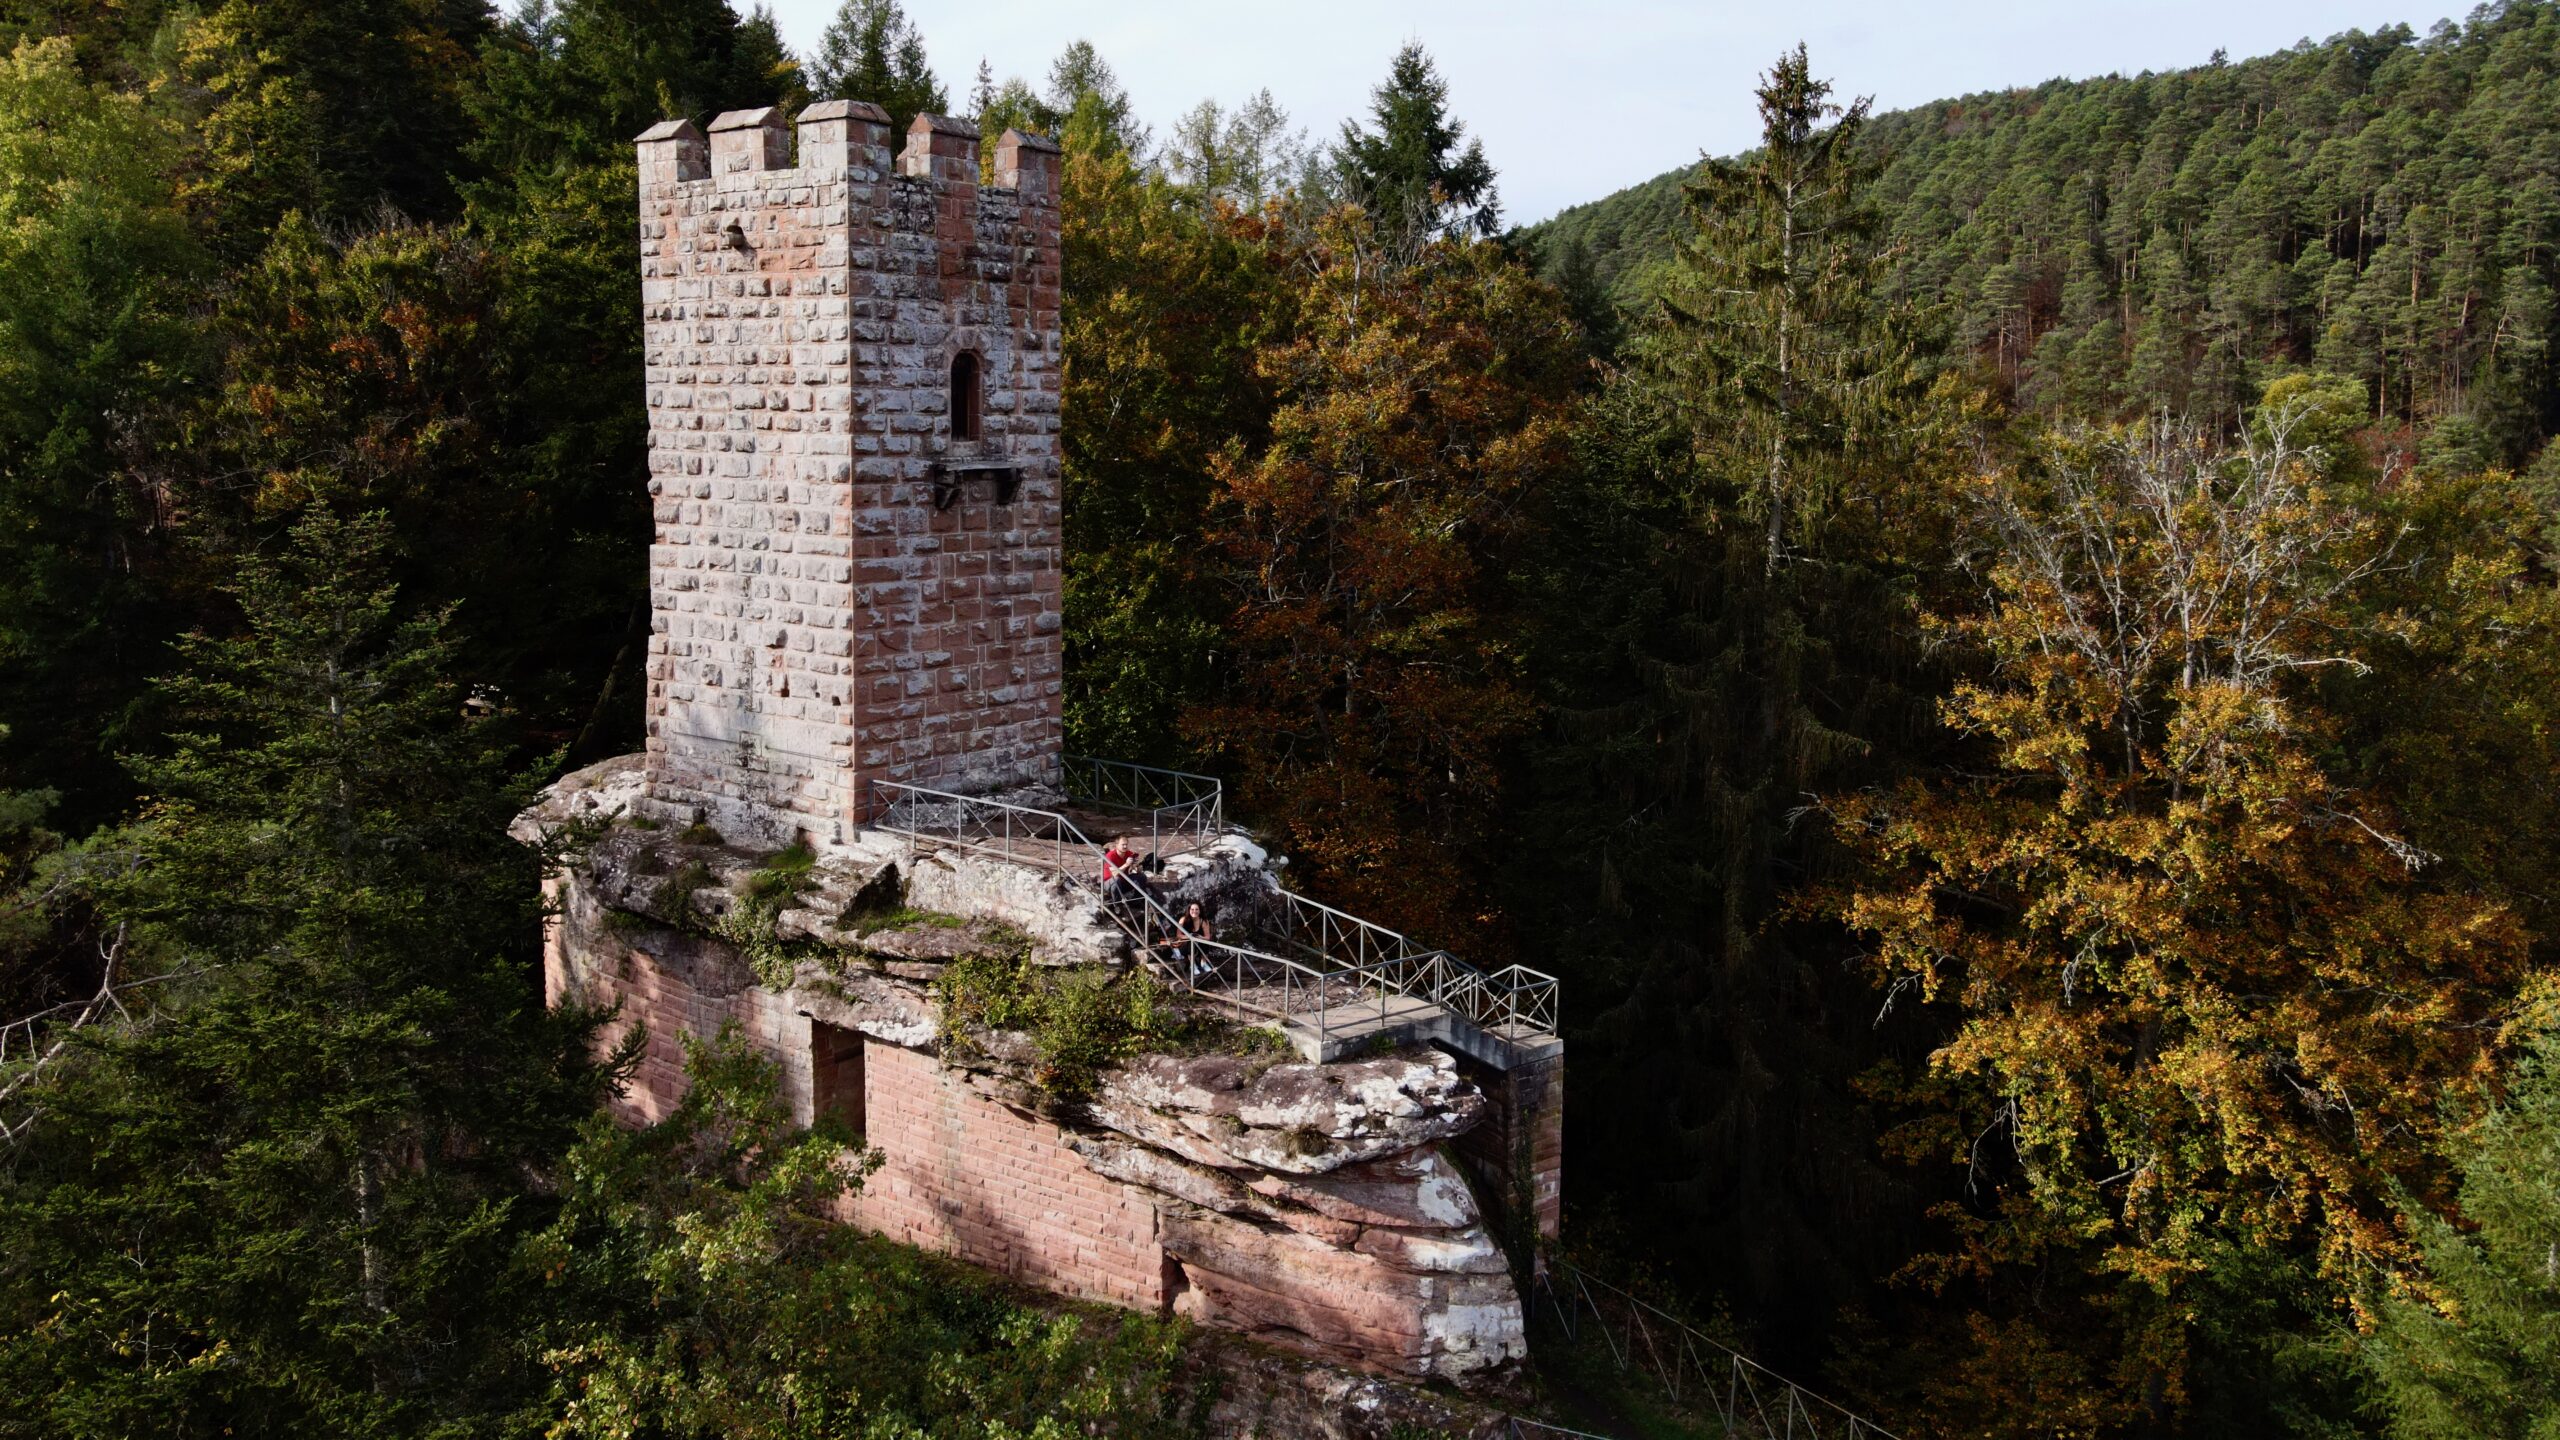 erfenstein castle from a drone and slightly above